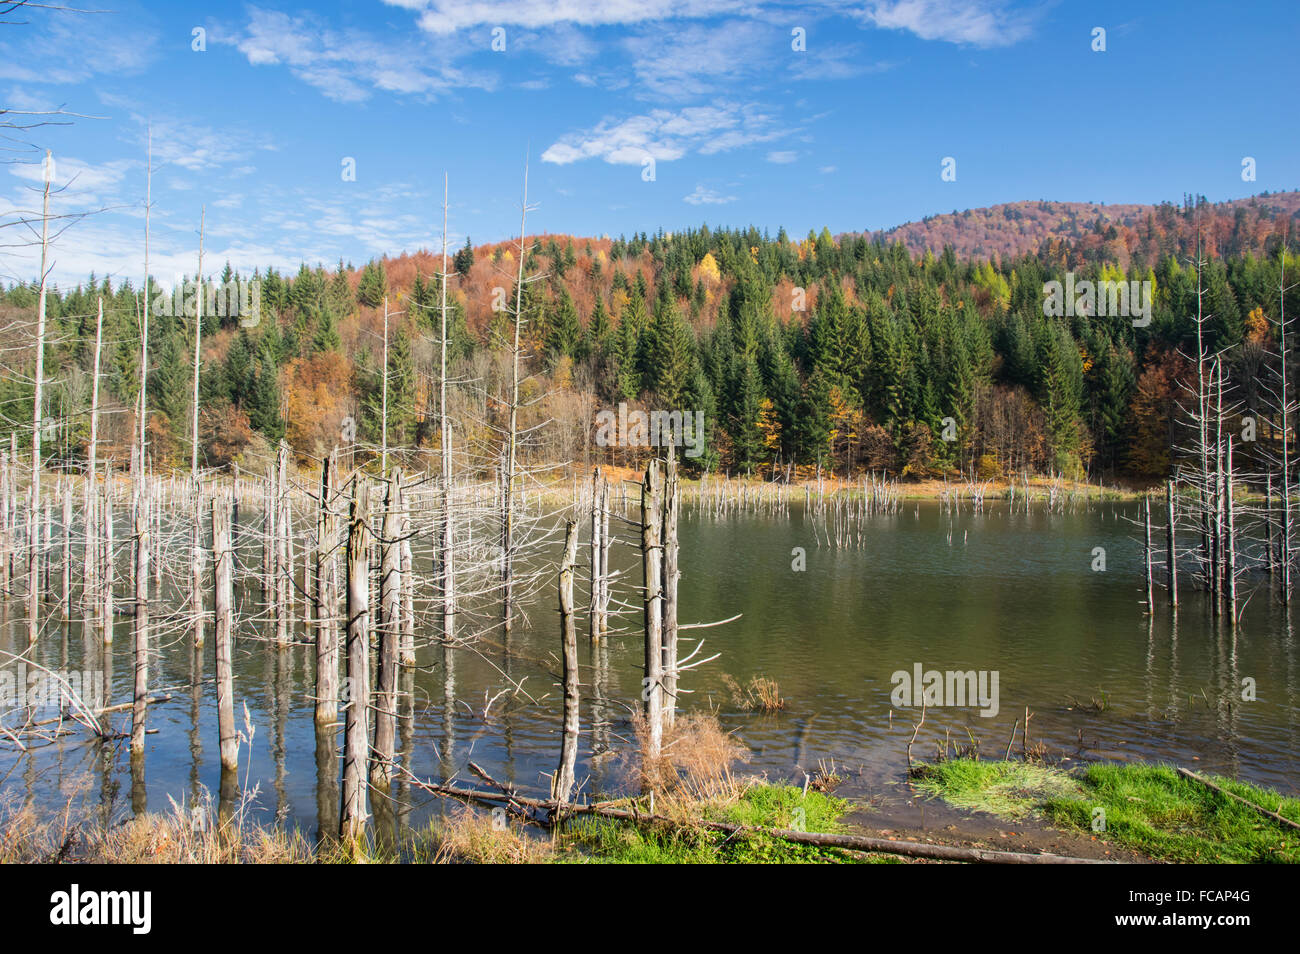 Dead trees in a swamp lake. Cuejdel lake was born 30 years ago (a landfall on river Cuejdel), Today is the biggest natural dam l Stock Photo